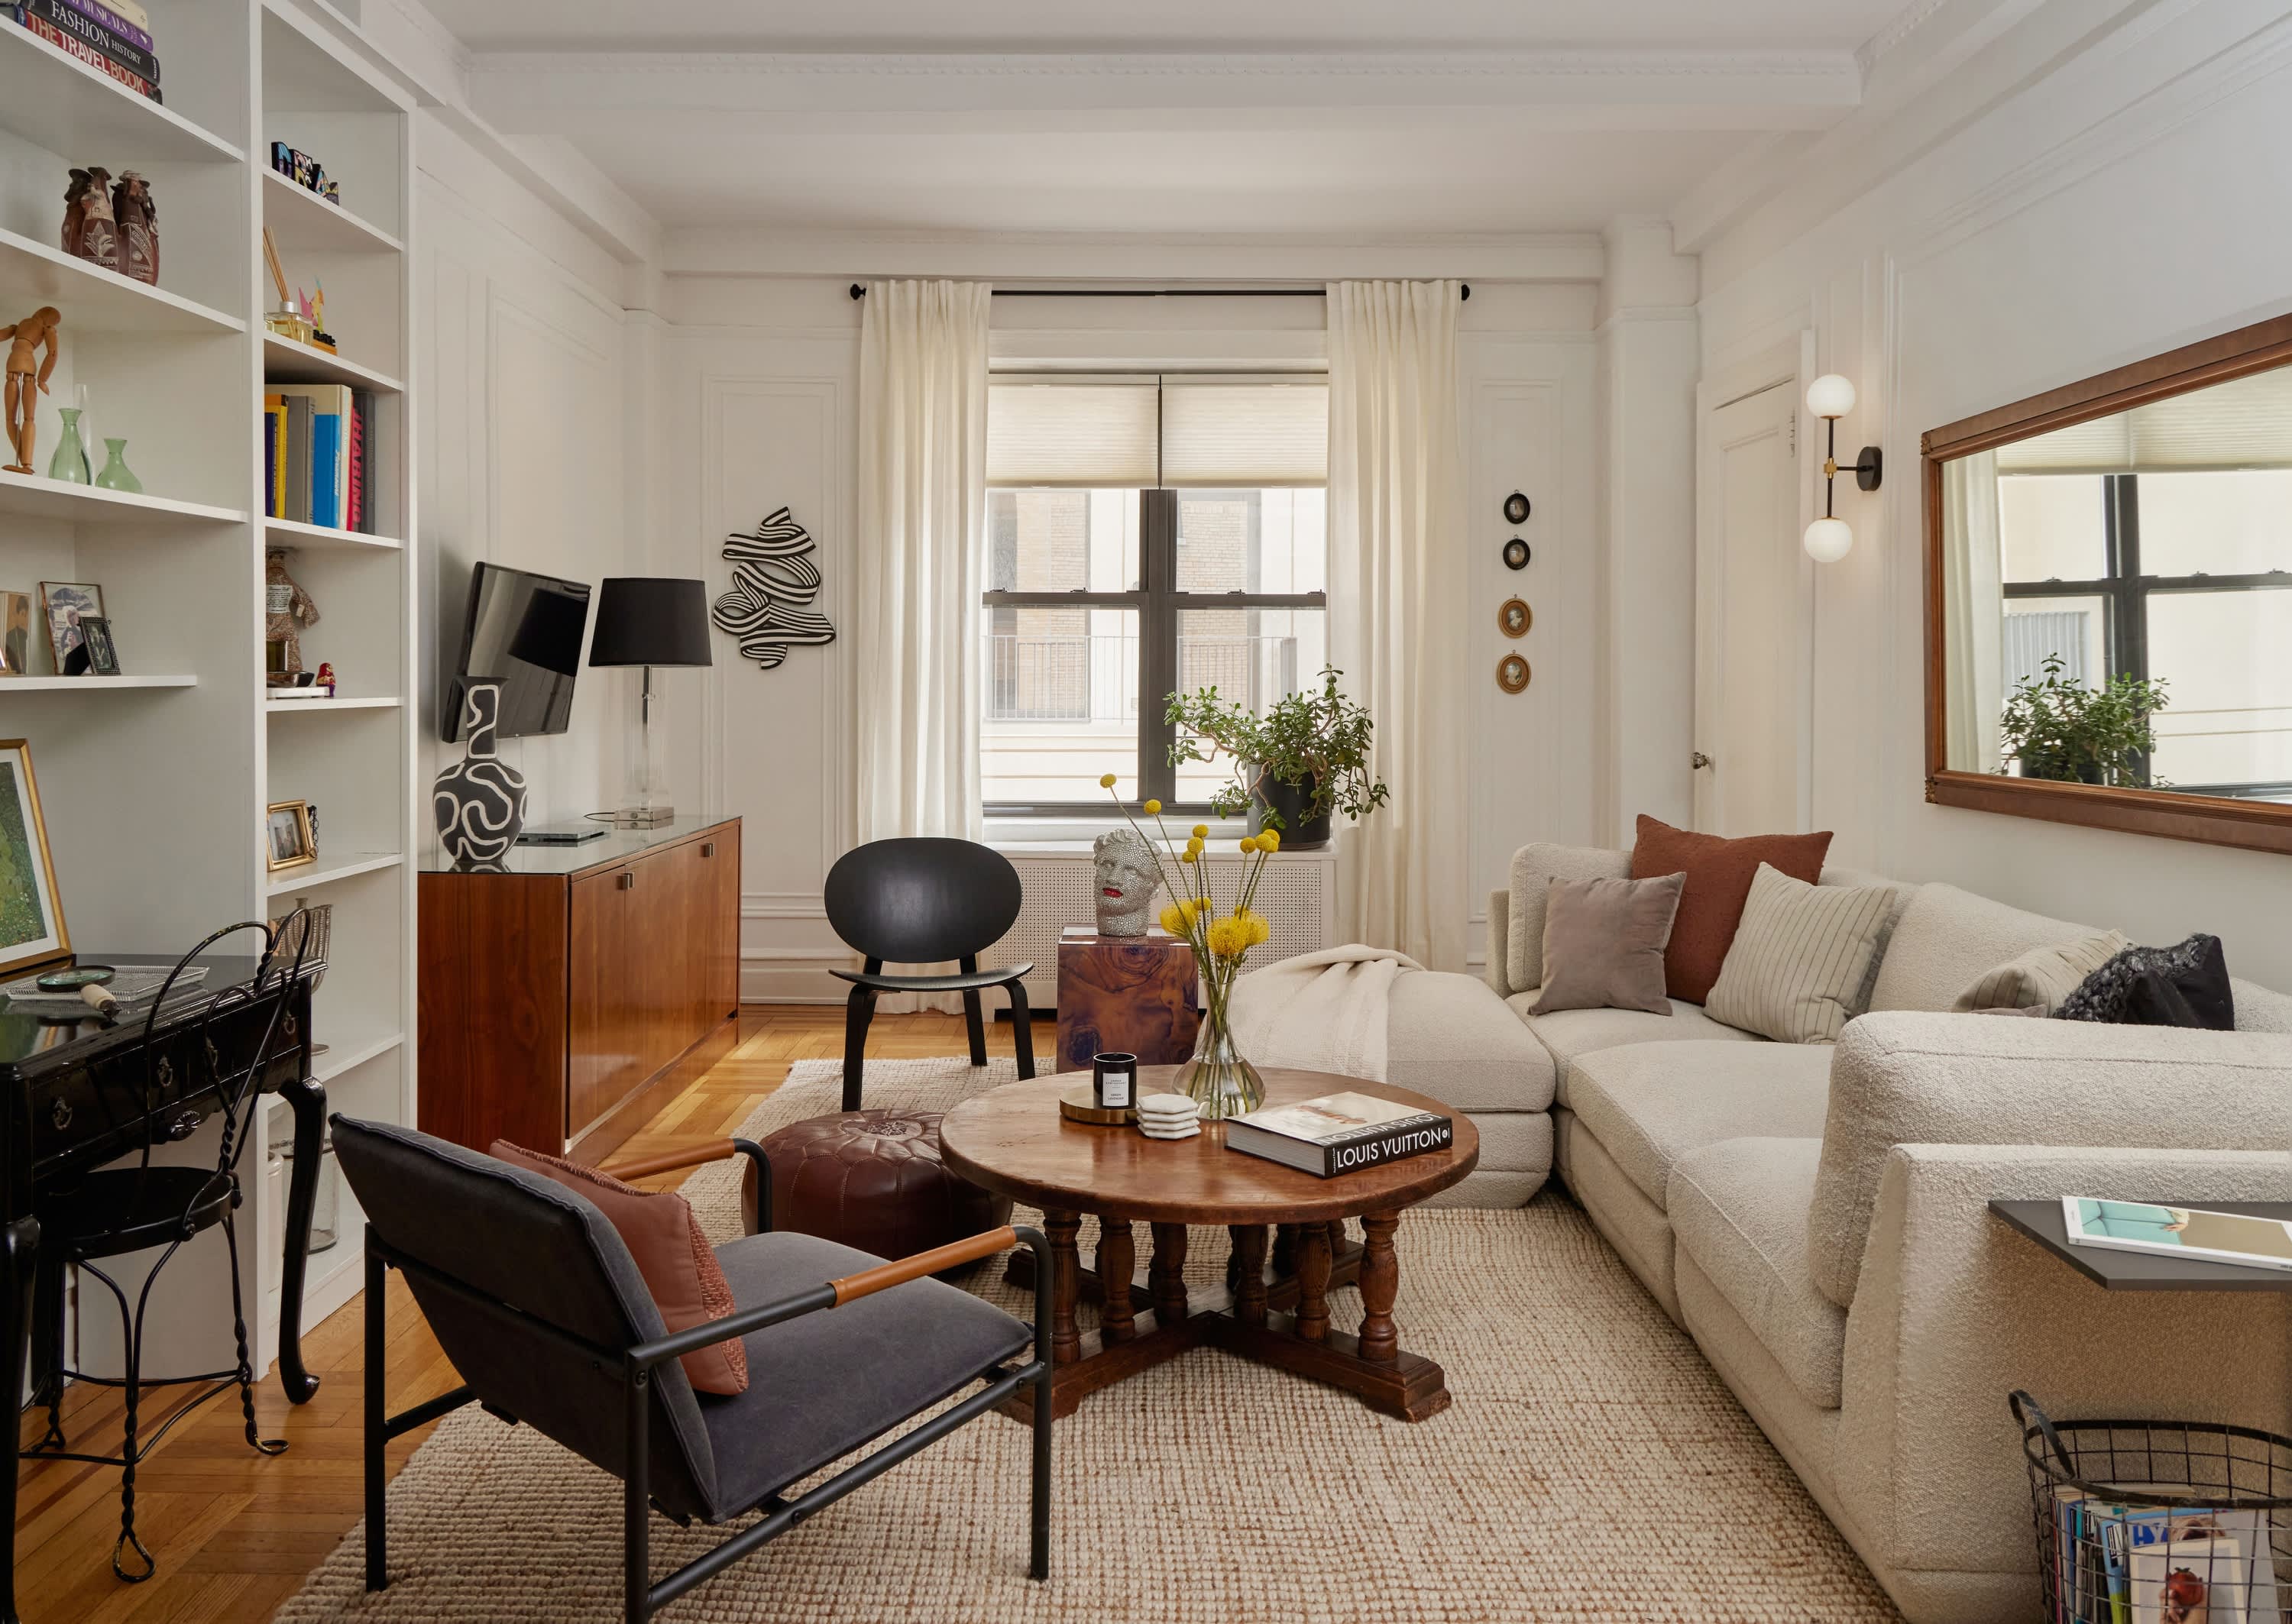 A Designer Turned Her Tumbledown NYC Apartment Into A, 47% OFF